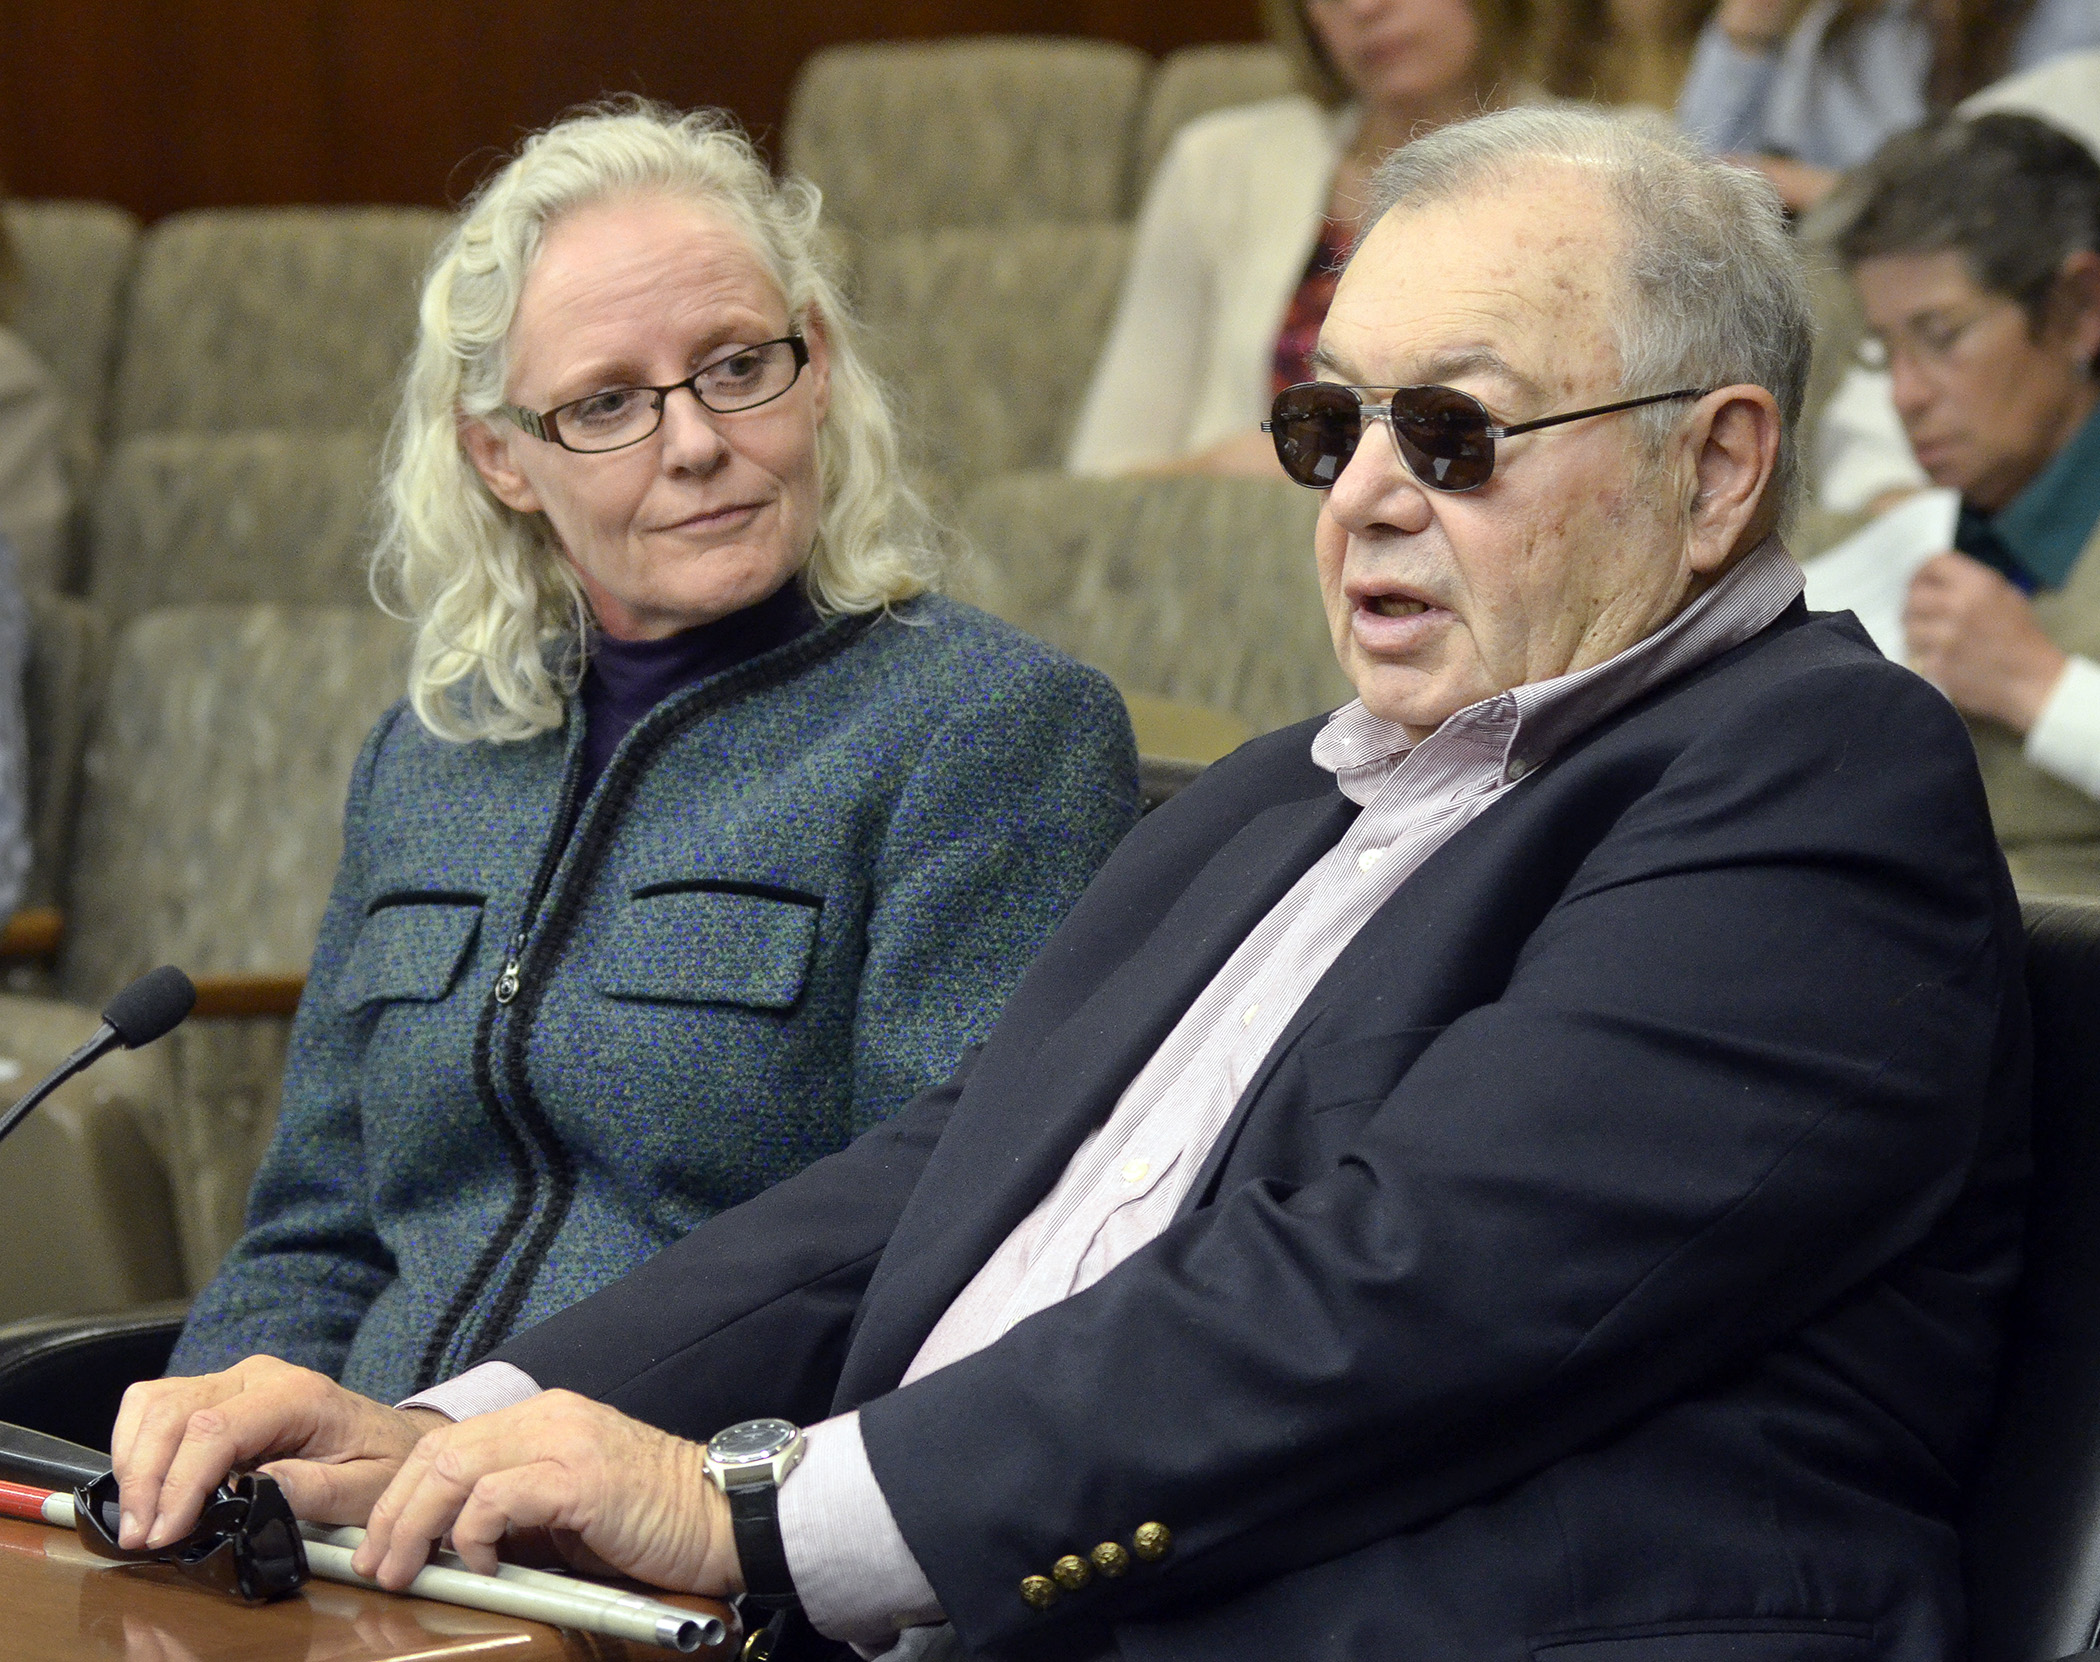 Kate Grathwol, president/CEO of Vision Loss Resources, and Allen Hyatt, a retired assistant Minneapolis city attorney, testify for a bill to establish an in-home and community service grant program for older adults with vision loss. Photo by Andrew VonBank